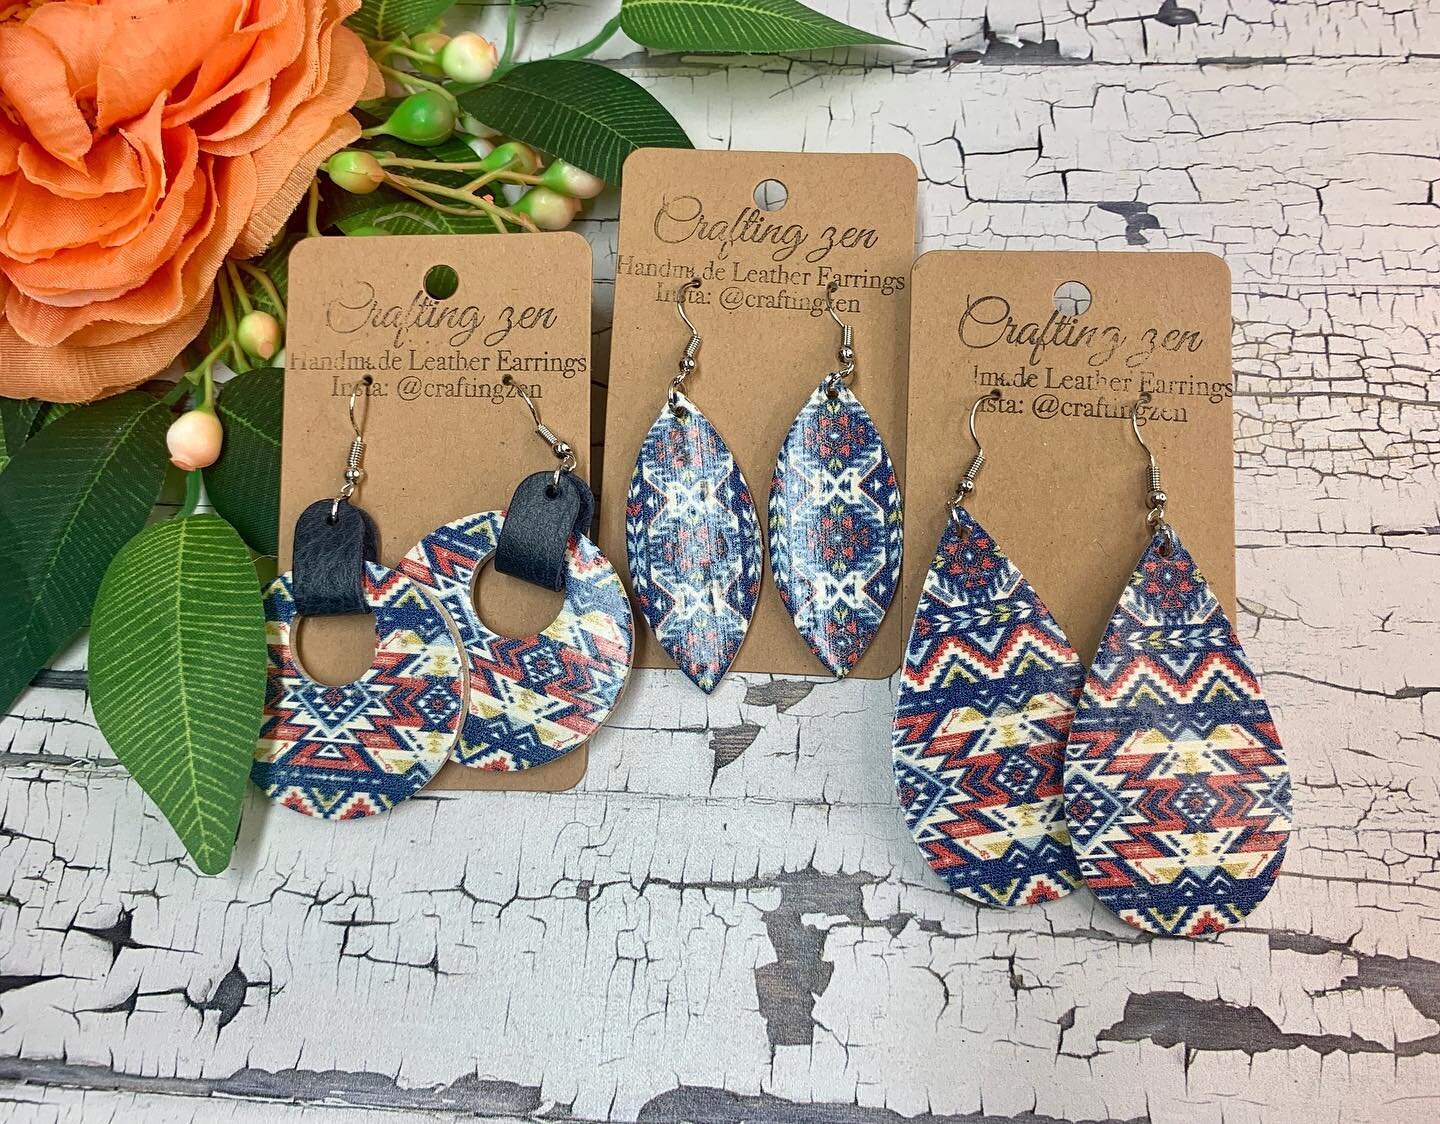 Digging that Southwest vibe these days. I do believe I was meant to grow up on a ranch out west. Pattern will vary depending on style chosen and the placement on the leather. 

www.craftingzenleather.com

#craftingzenleather #earrings #armstrongjewel